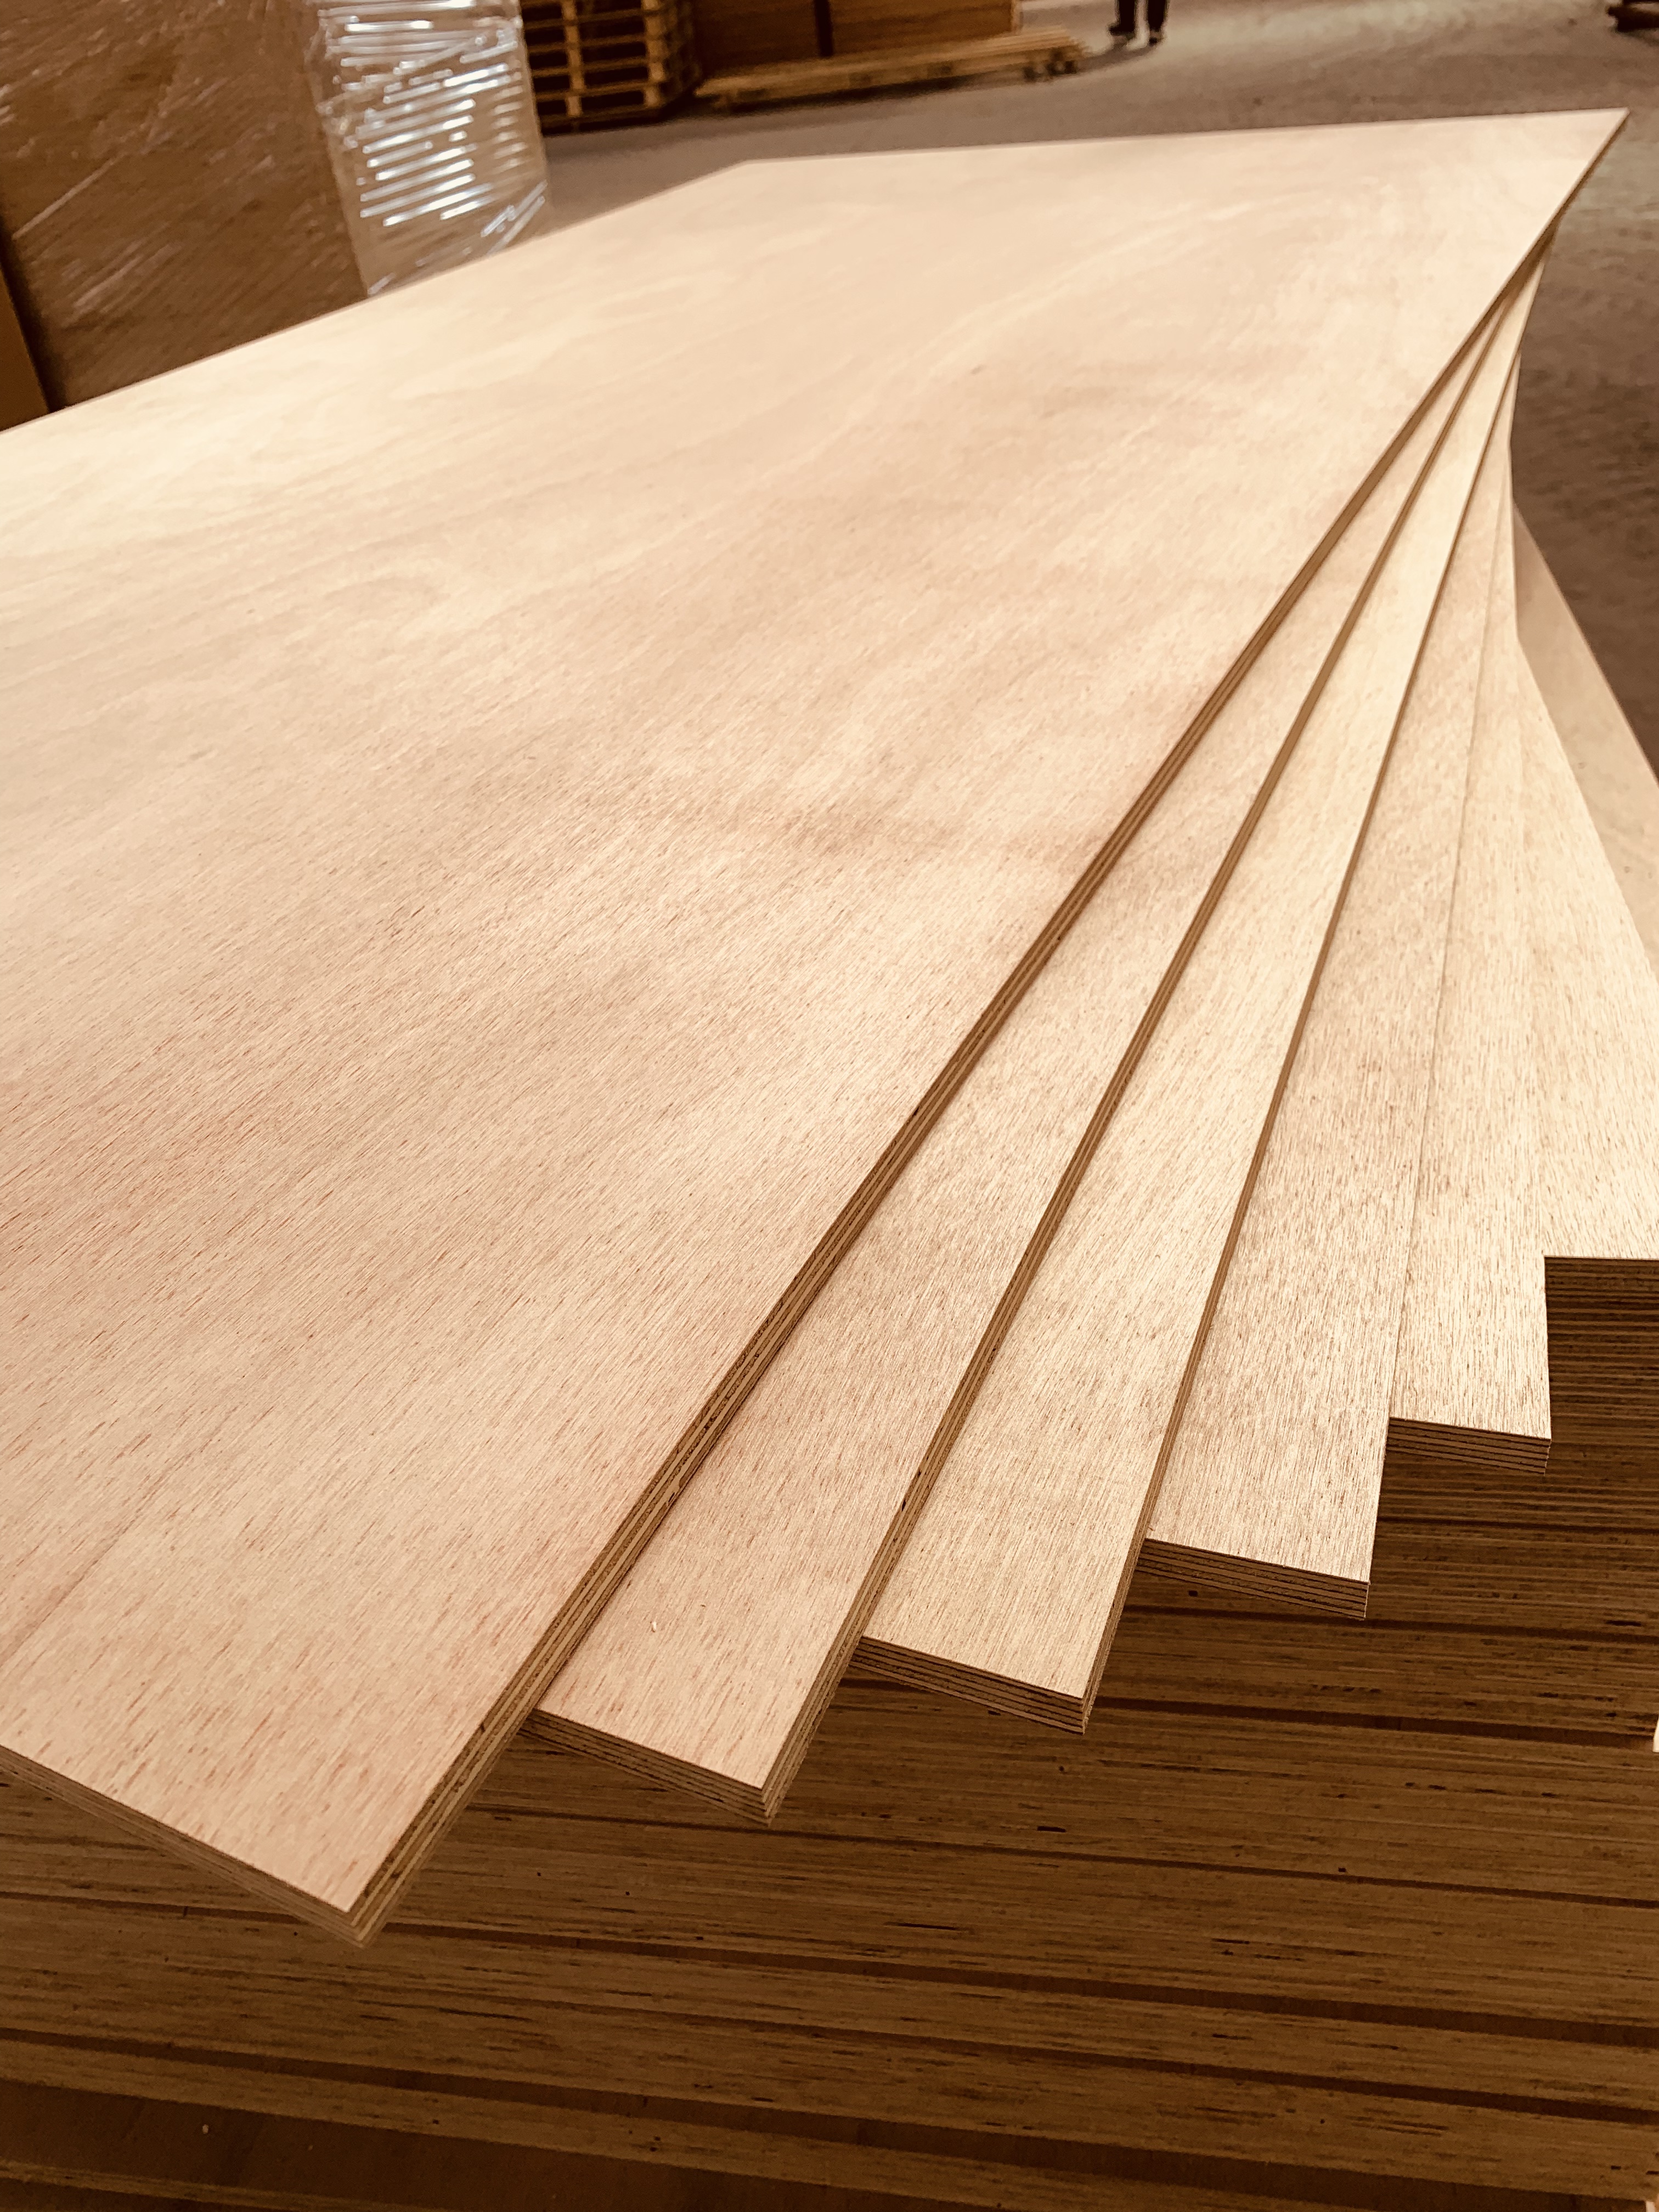 The difference between marine plywood and plywood